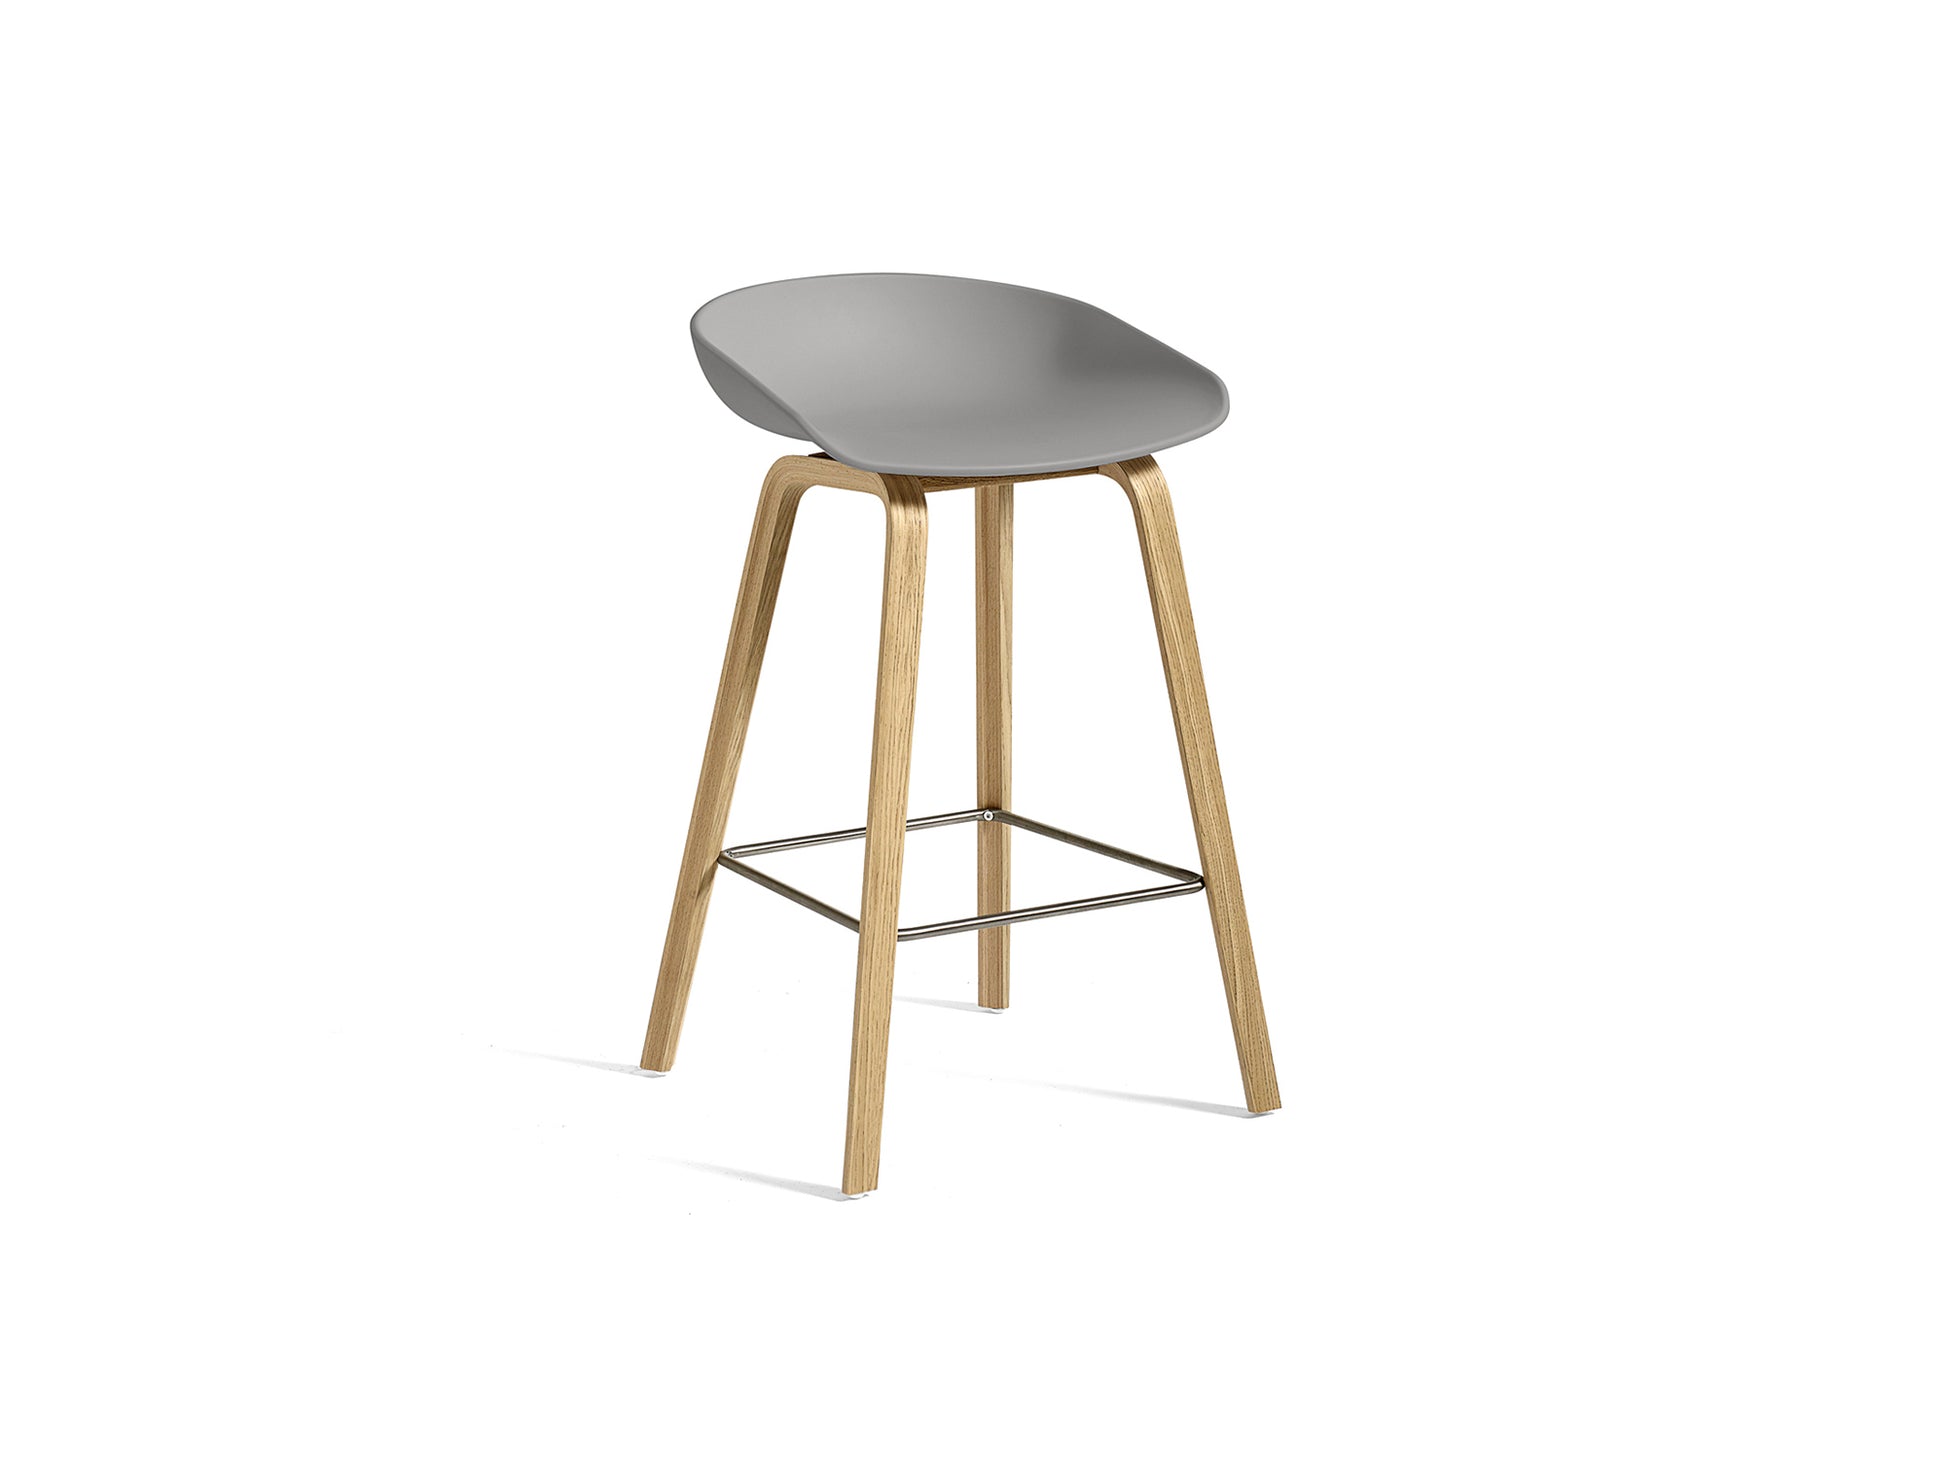 About A Stool AAS 32 by HAY - H 65cm /  Concrete Grey Shell / Lacquered Oak Base